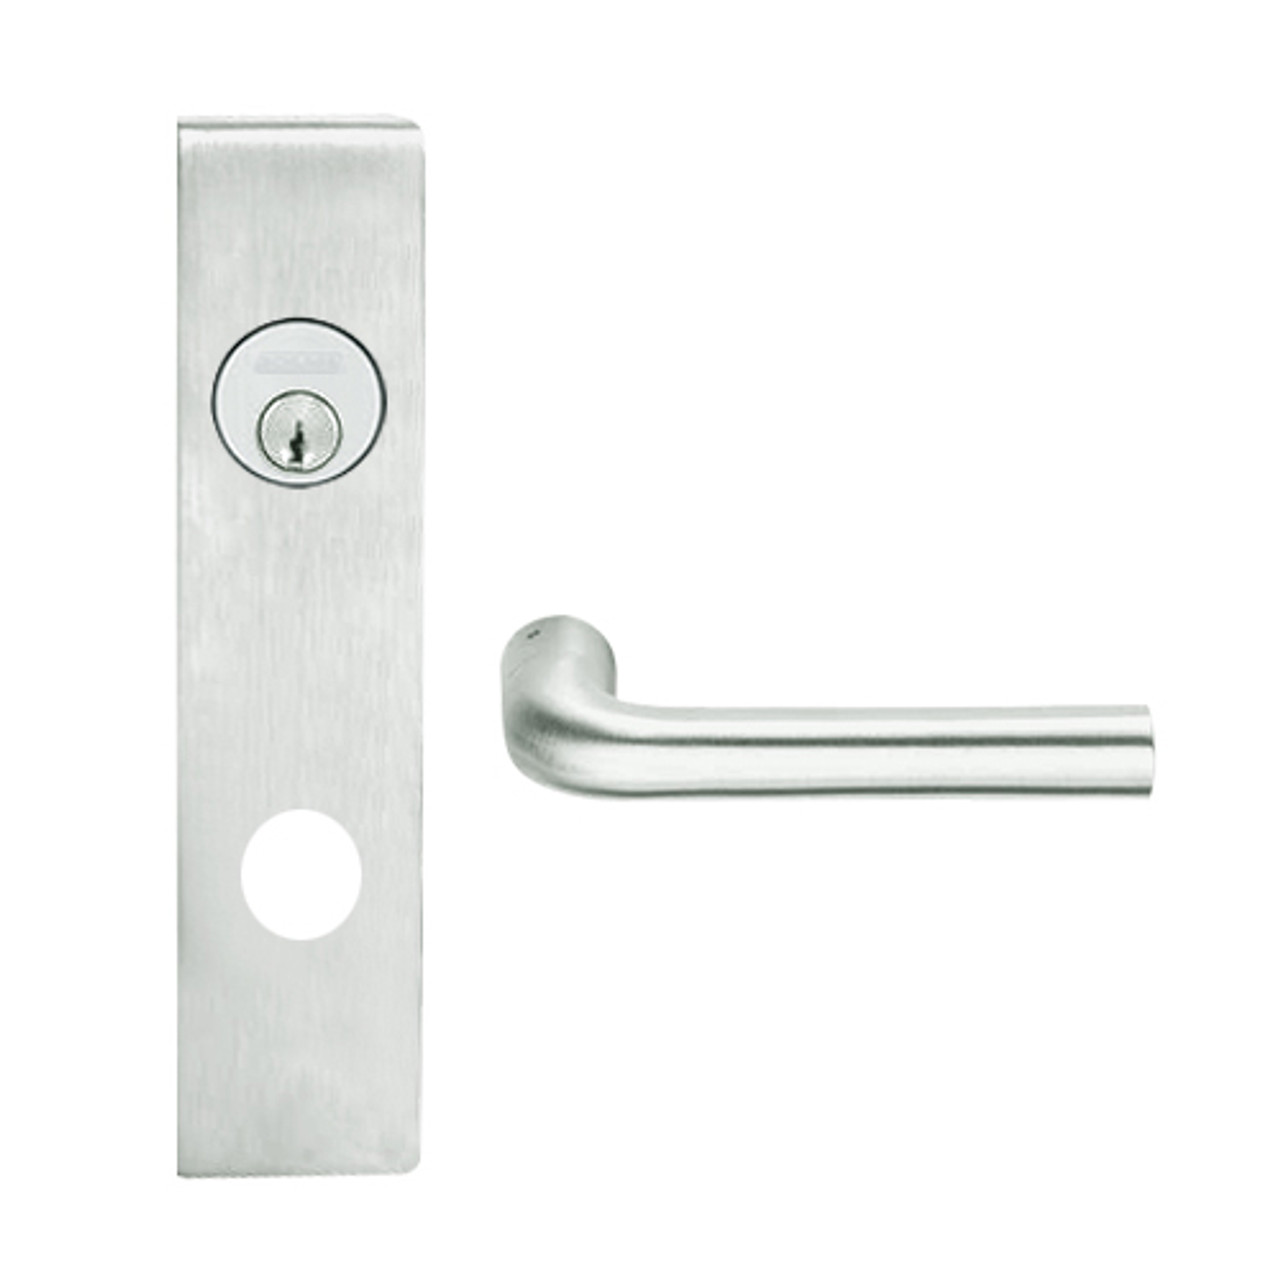 L9026P-02L-619 Schlage L Series Exit Lock with Cylinder Commercial Mortise Lock with 02 Cast Lever Design in Satin Nickel